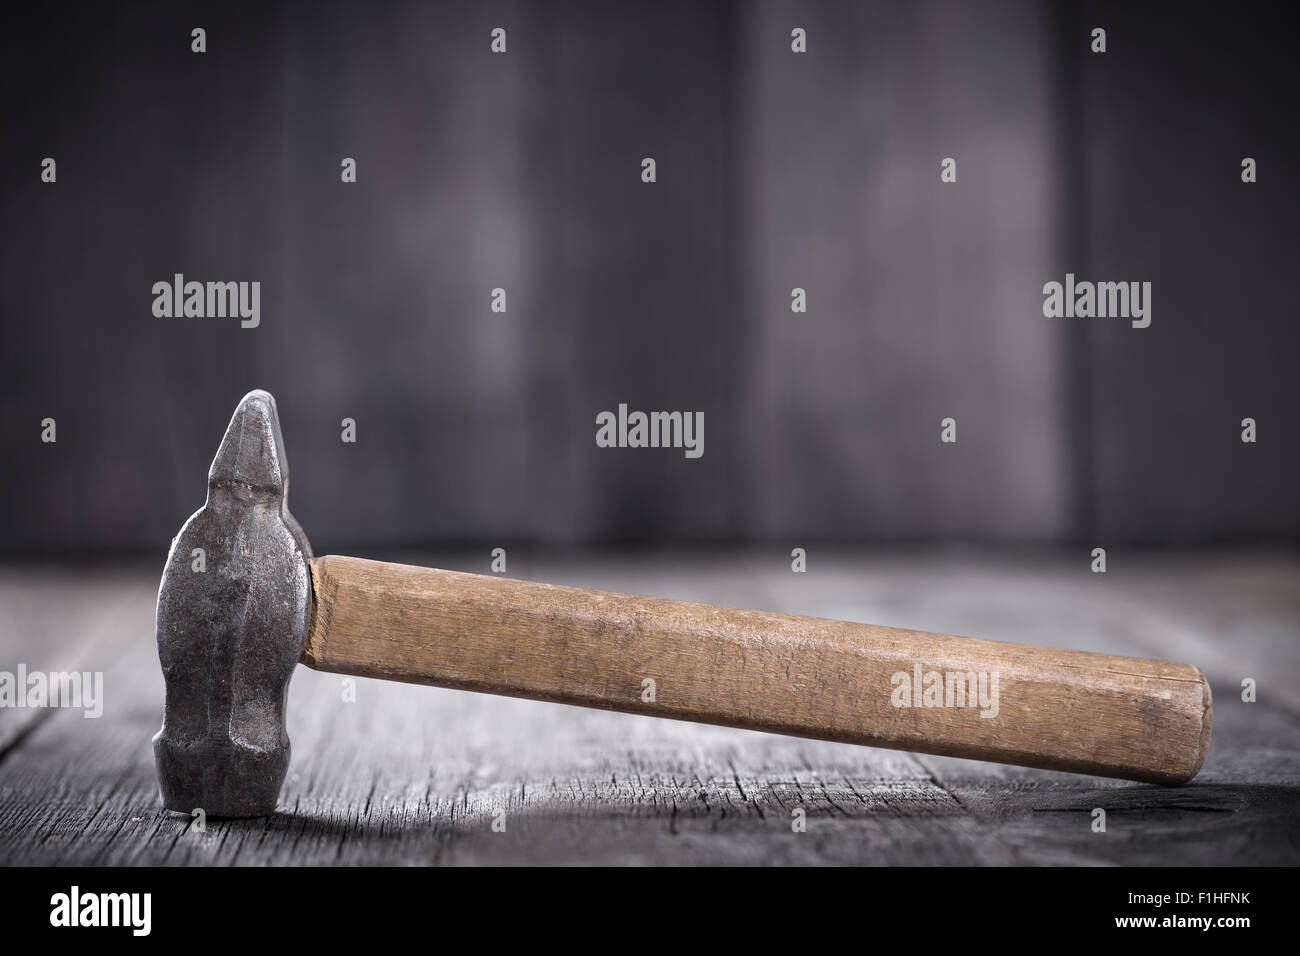 Hammer on a wooden background Stock Photo